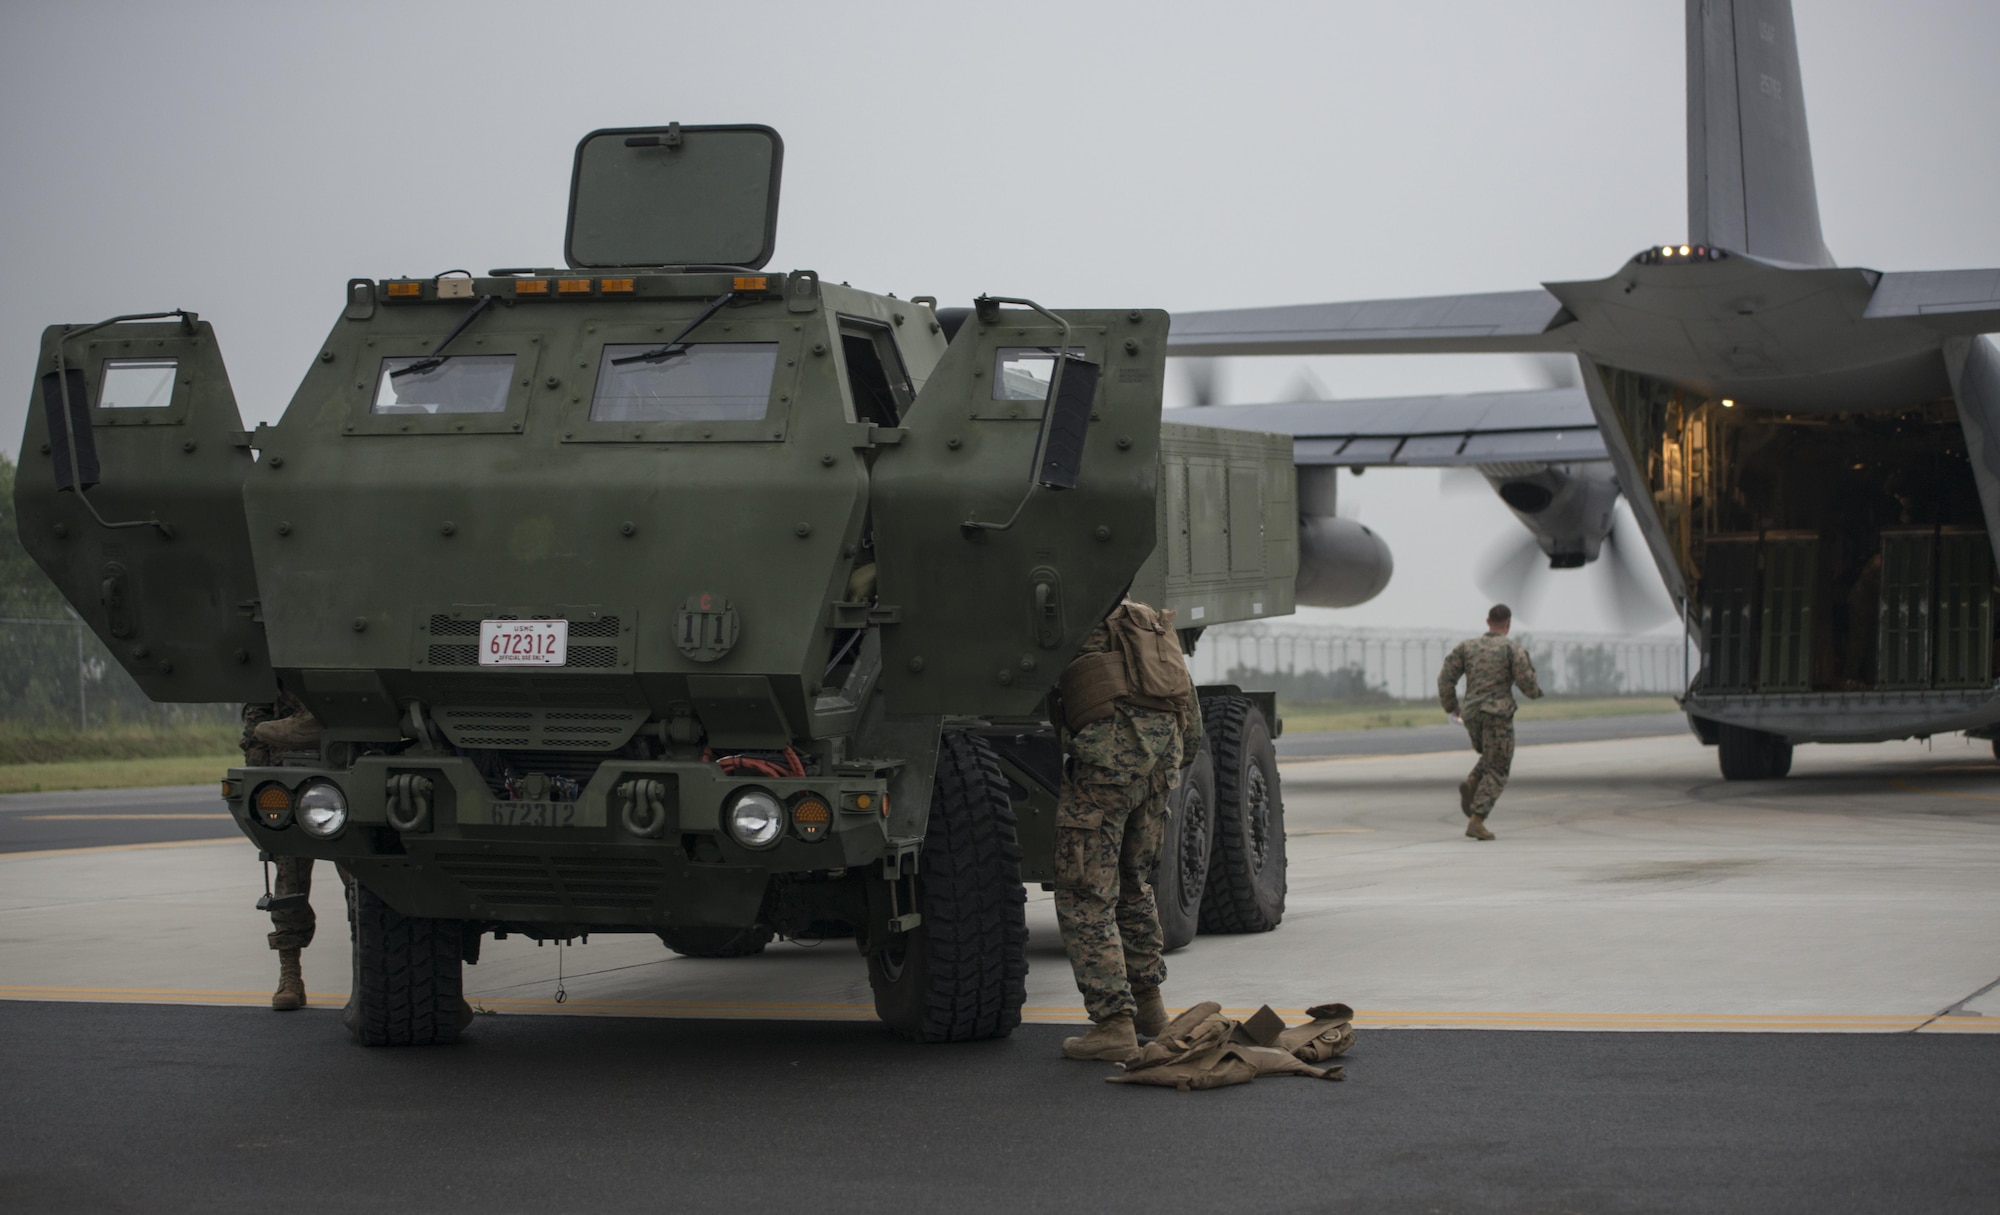 U.S. Marine Corps 12th Marine Regiment, 3rd Marine Division operators offload a High Mobility Artillery Rocket System (HIMARS) from a U.S. Air Force Special Operations Command MC-130J Commando II assigned to the 353rd Special Operations Group during a readiness drill, June 1, 2017 at Kunsan Air Base, Republic of Korea. HIMARS’ precision fires technology and the specialized aviation provided by the MC-130J delivers a strategic capability for crisis response in the Pacific. (U.S. Air Force photo by Capt. Jessica Tait)